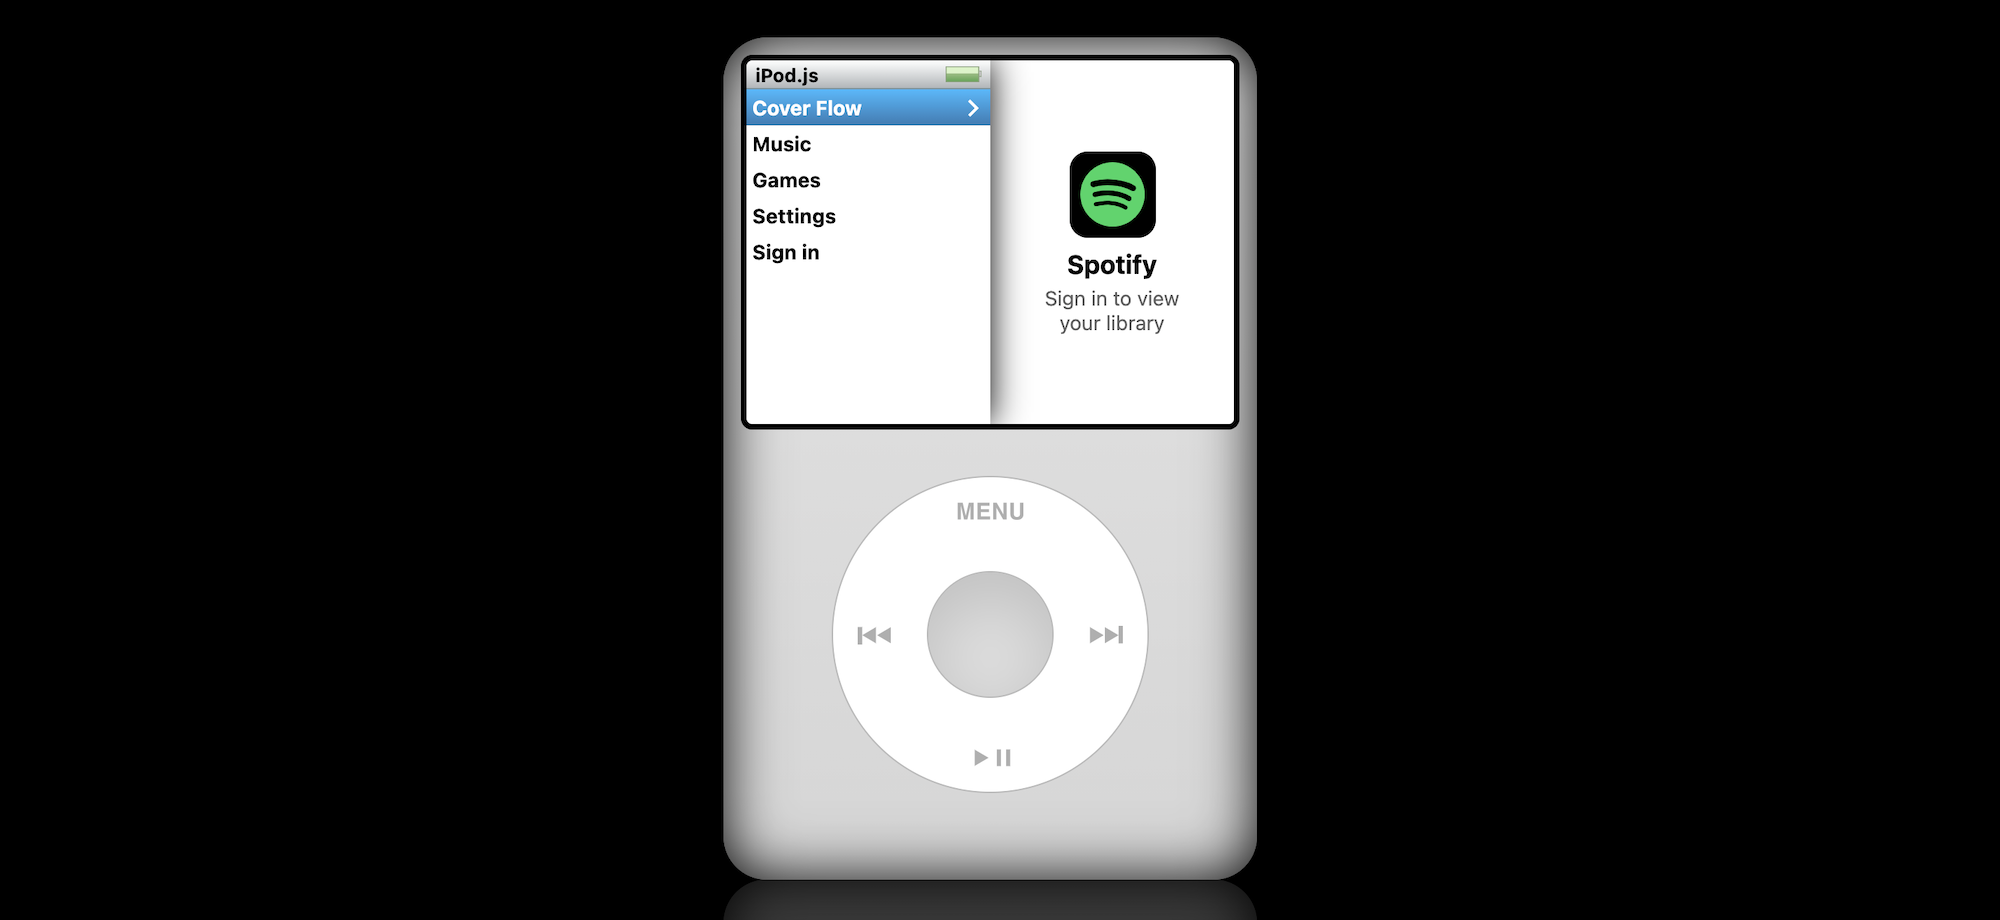 for ipod download Magic Browser Recovery 3.7